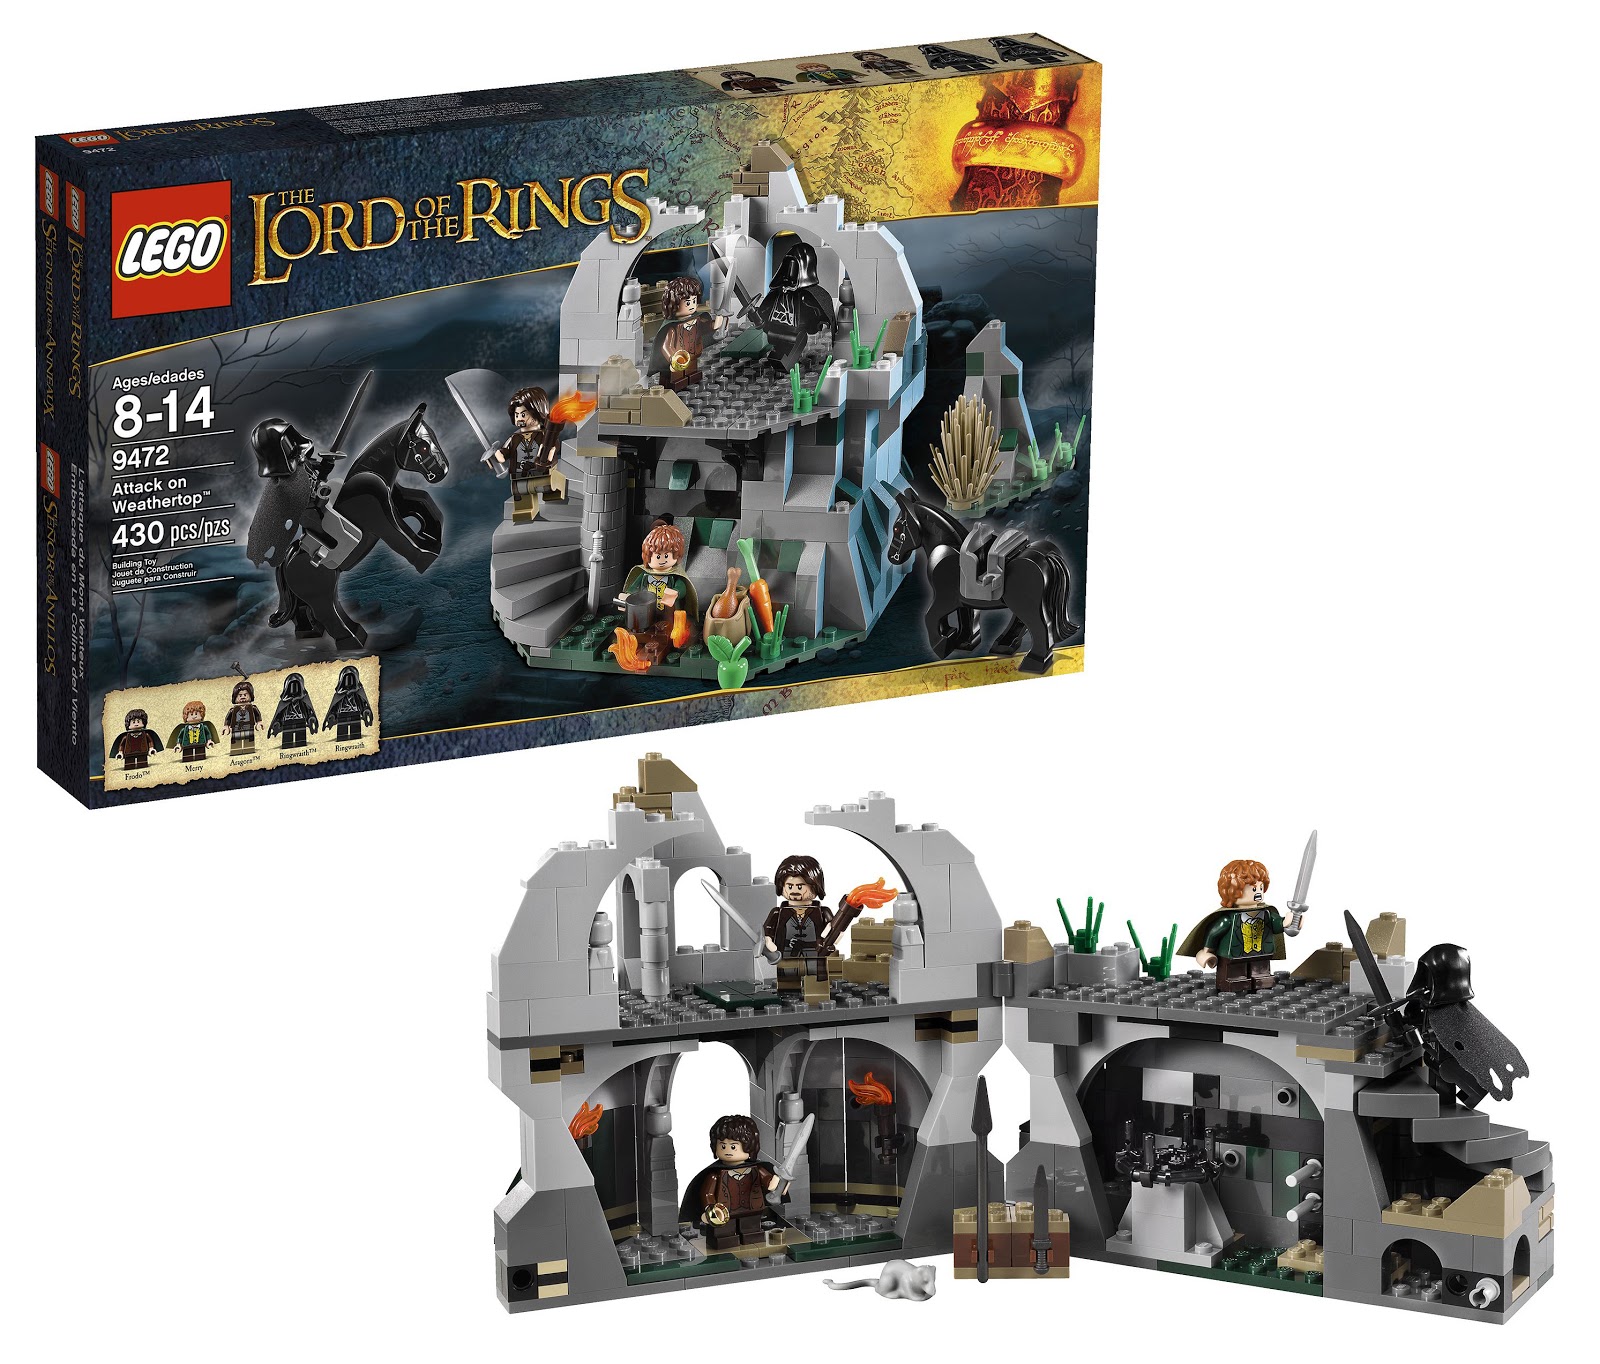 Lego+Lord+of+the+Rings+9472+Attack+on+Weathertop.jpg